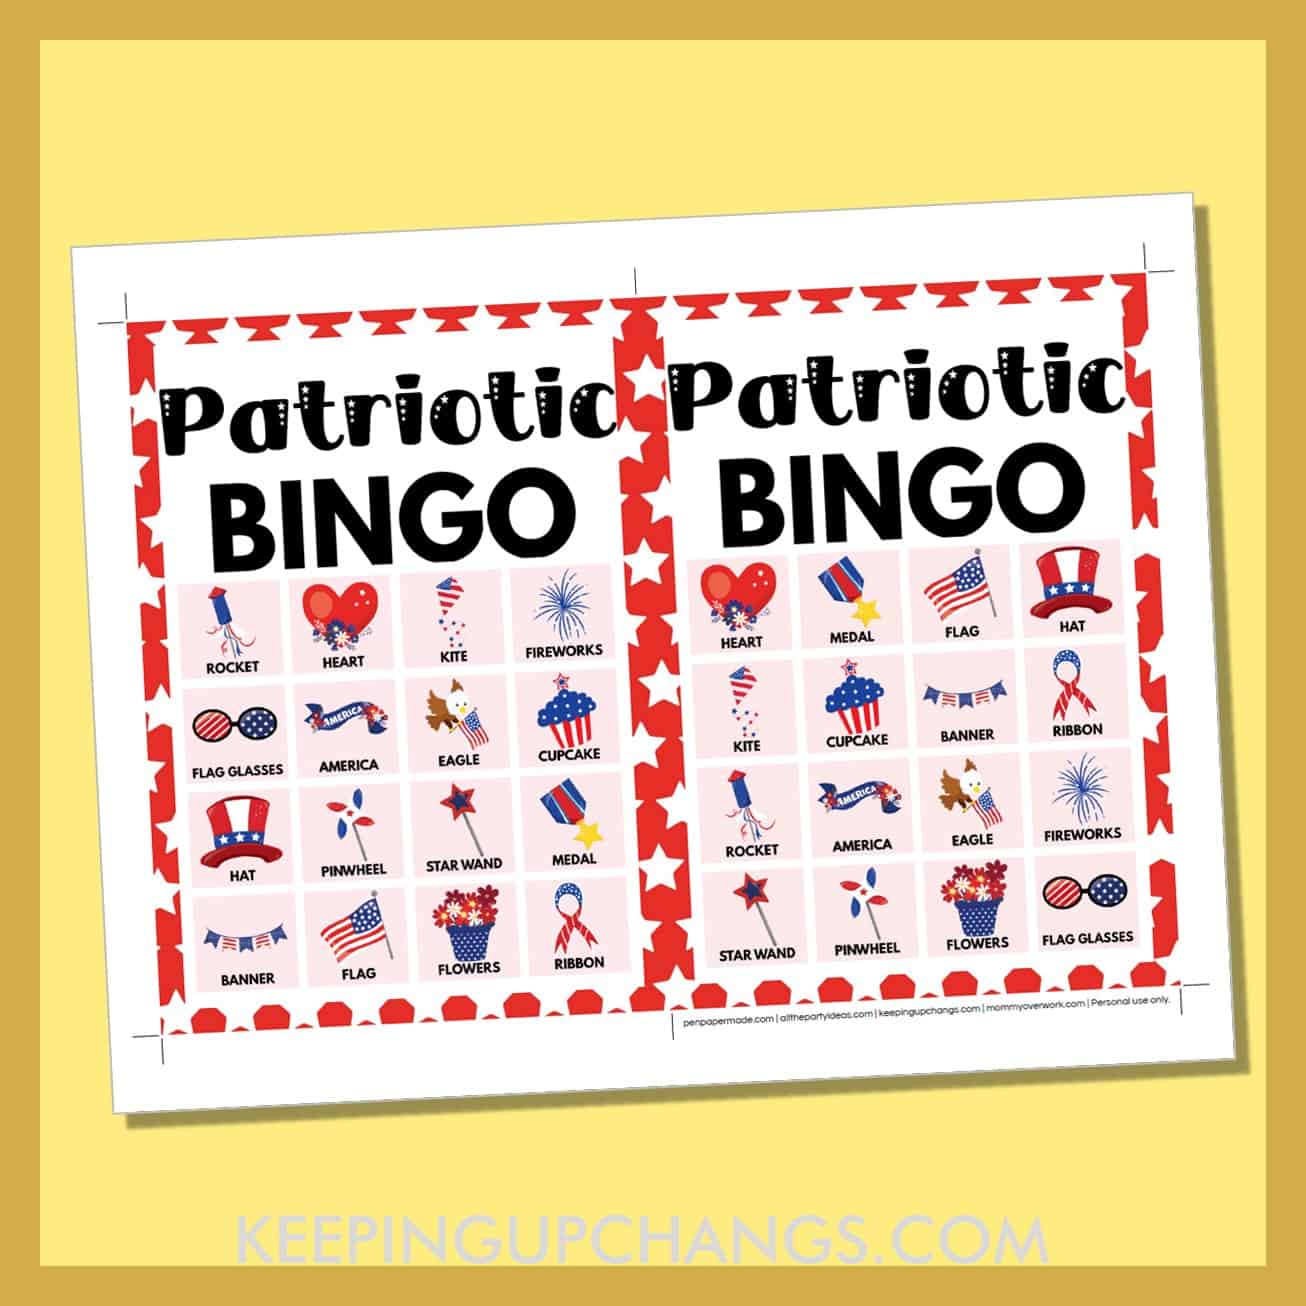 free patriotic bingo card 4x4 5x7 game boards with images and text words.